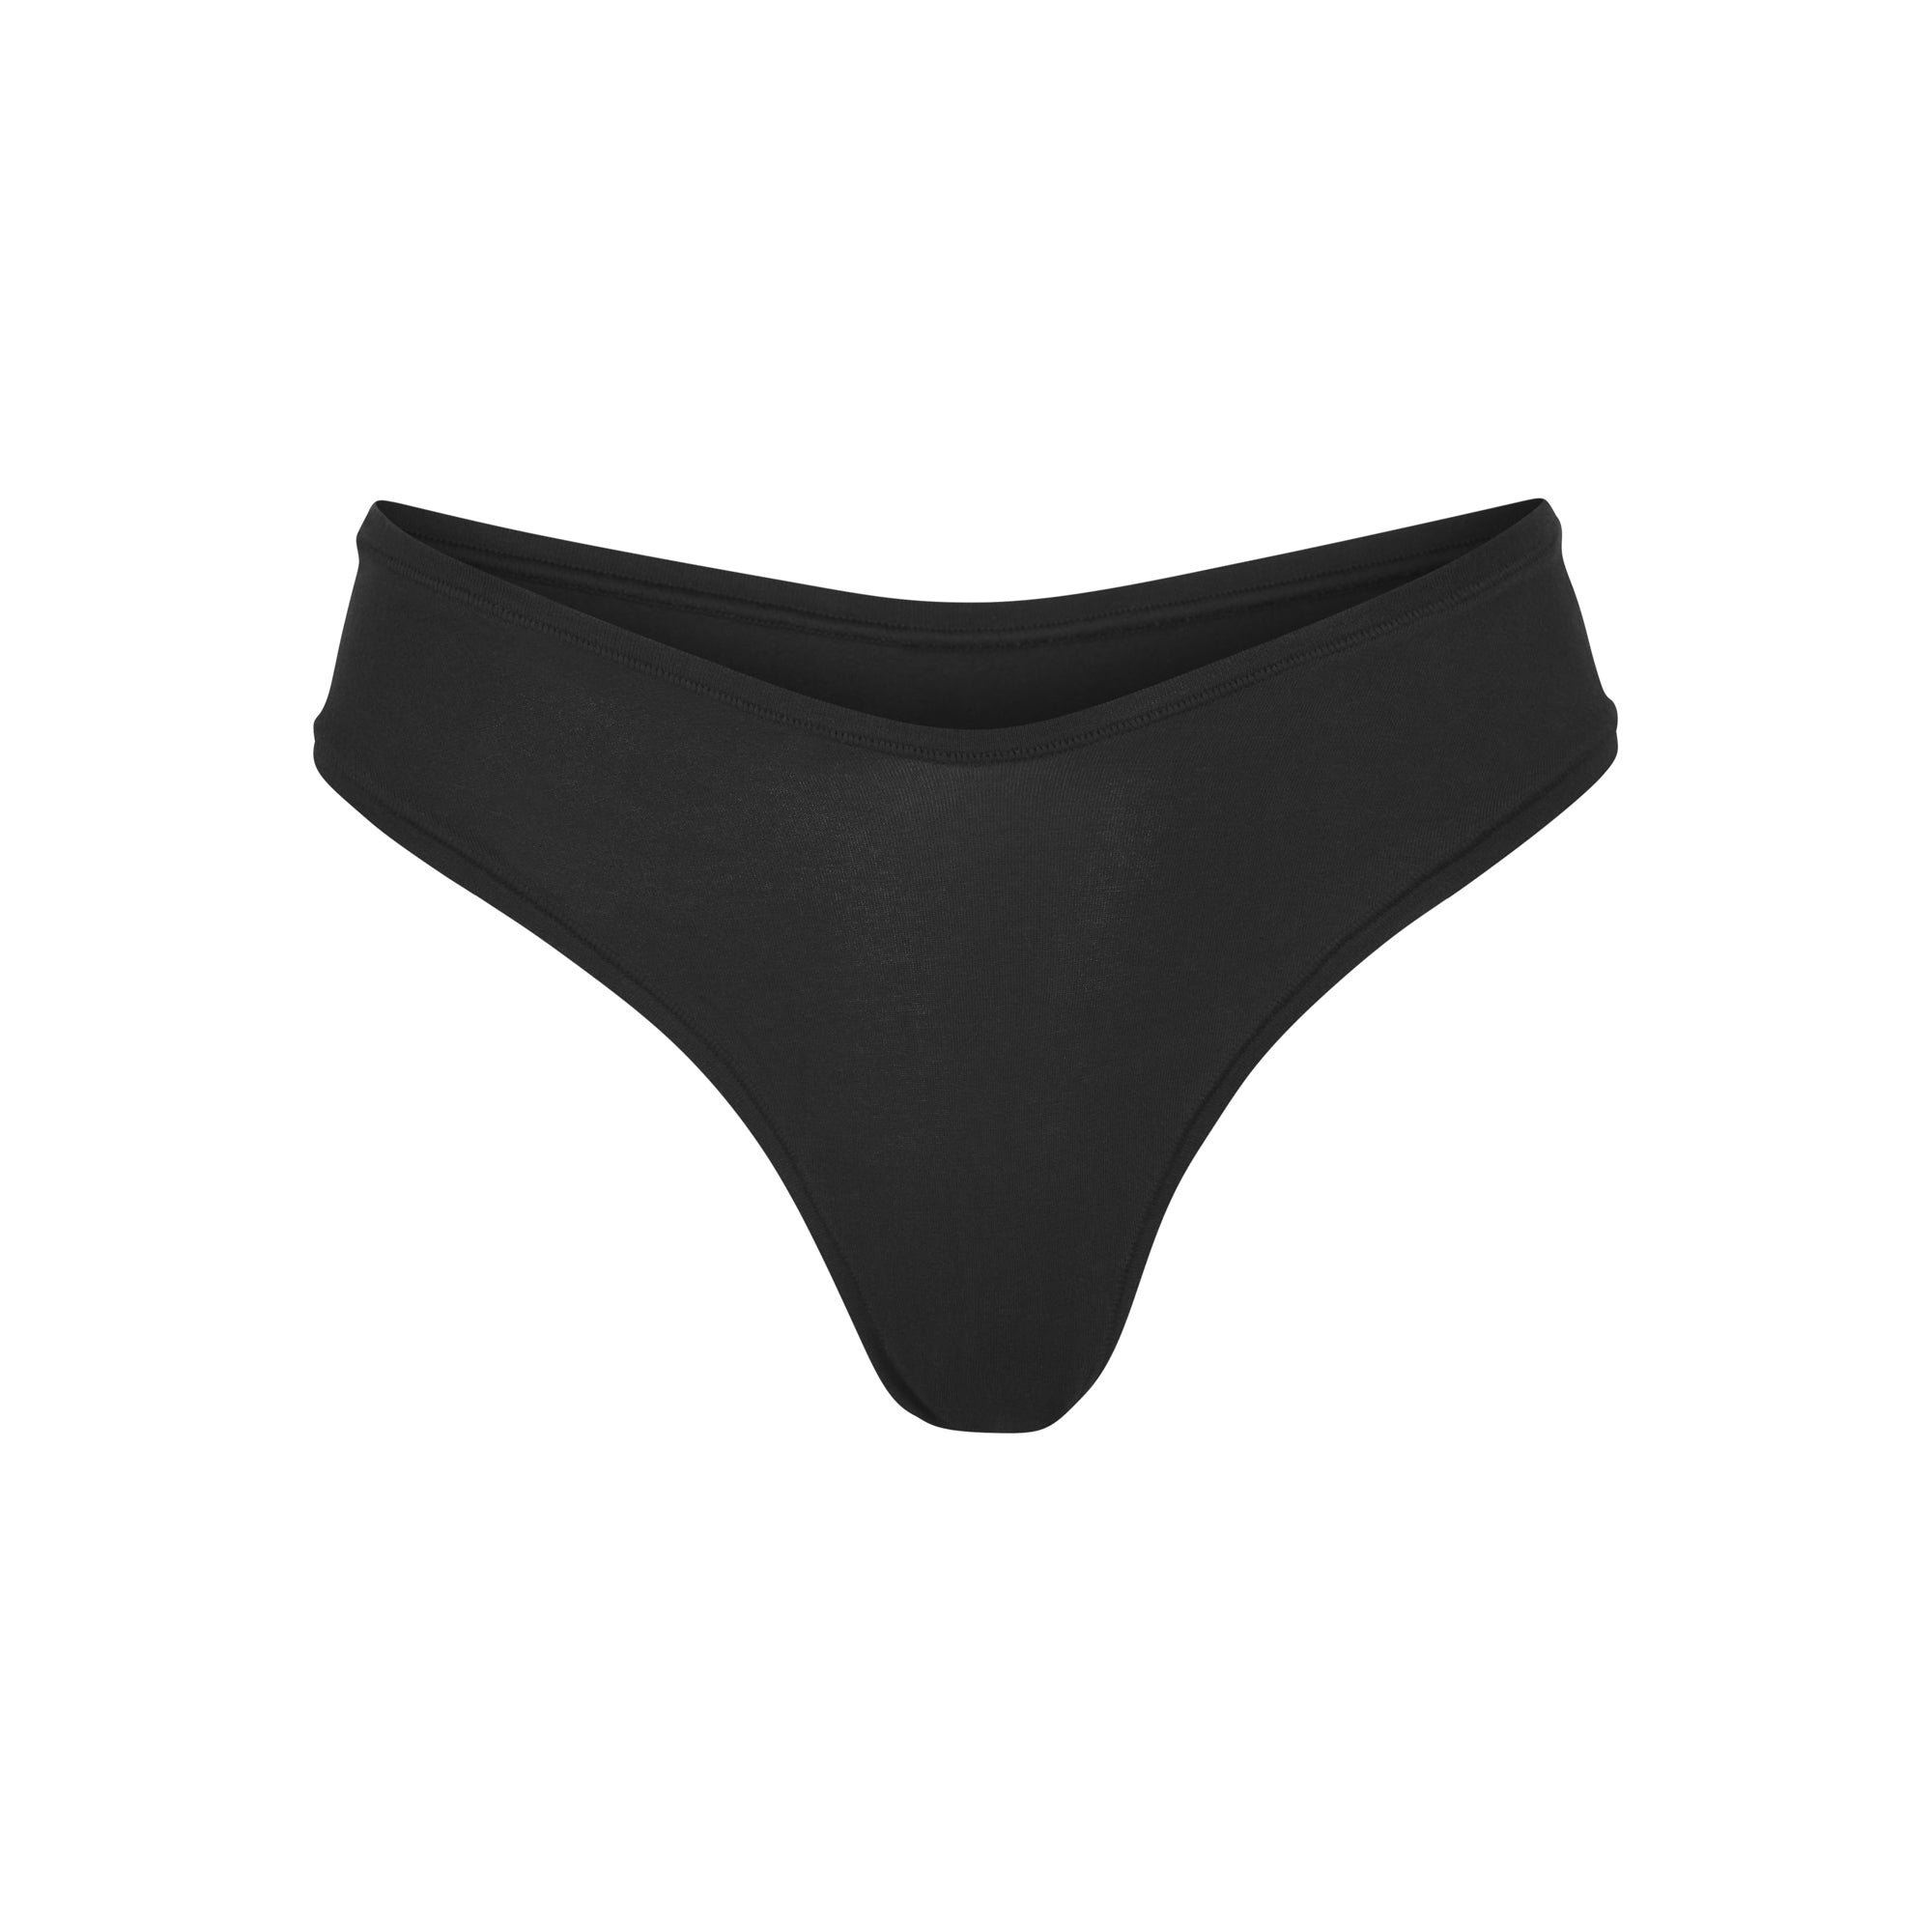 Women's Charter Club Panties and underwear from $8